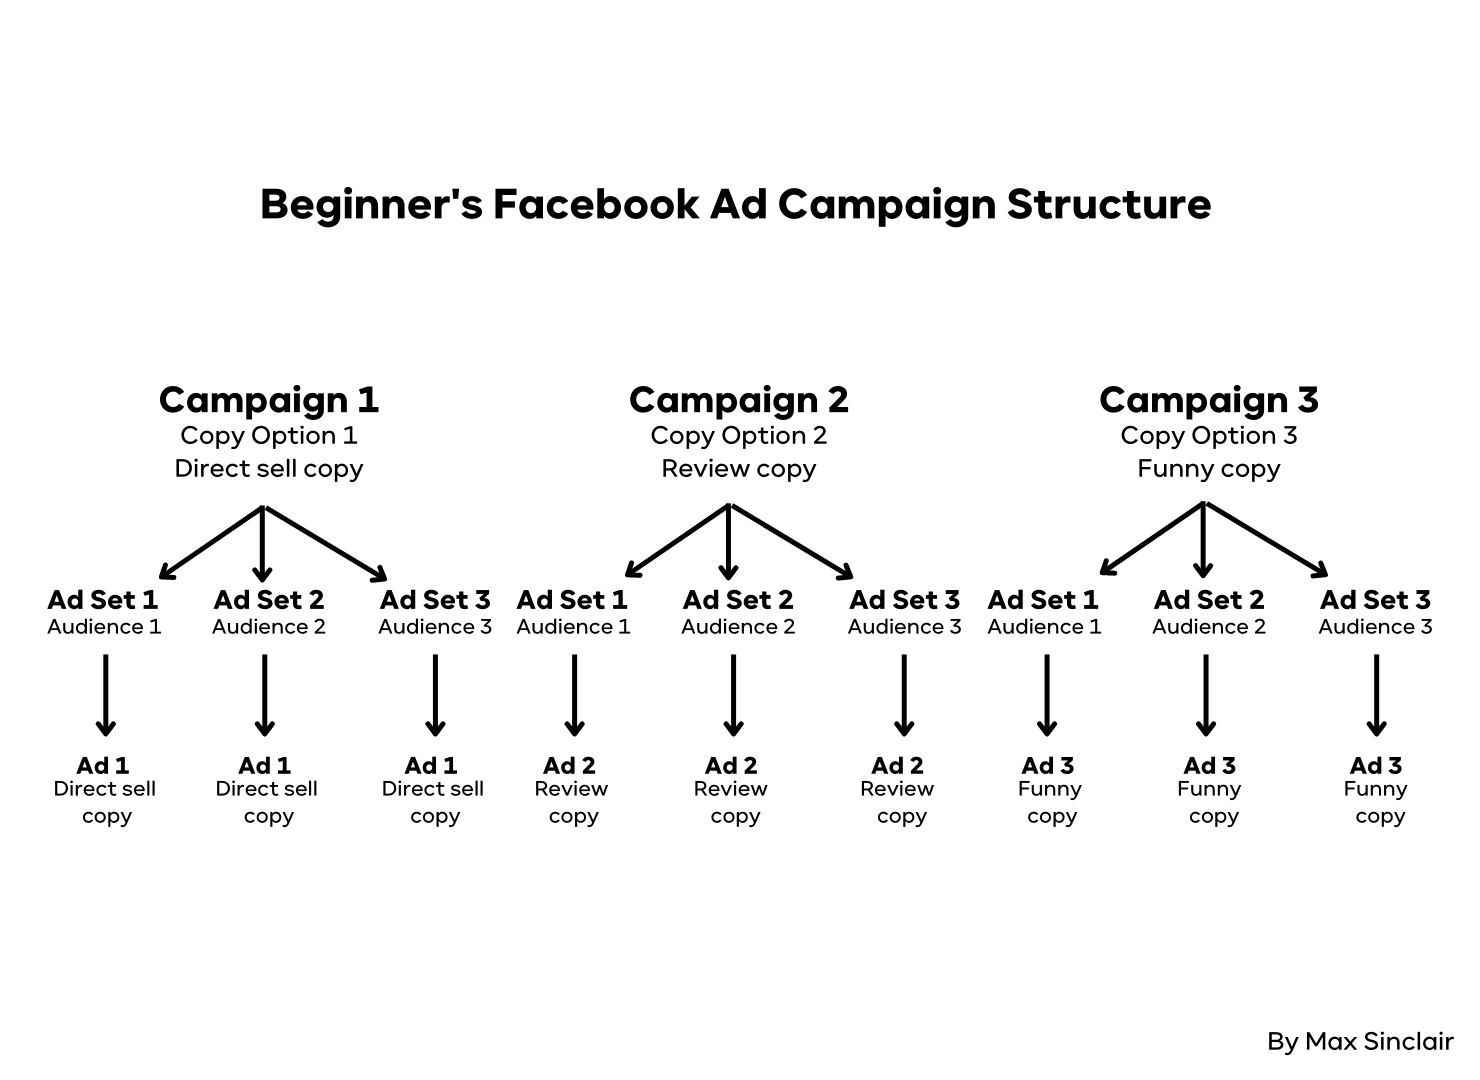 A tree chart featuring 3 campaigns at the top, each branching off to support 3 seperate audiences.